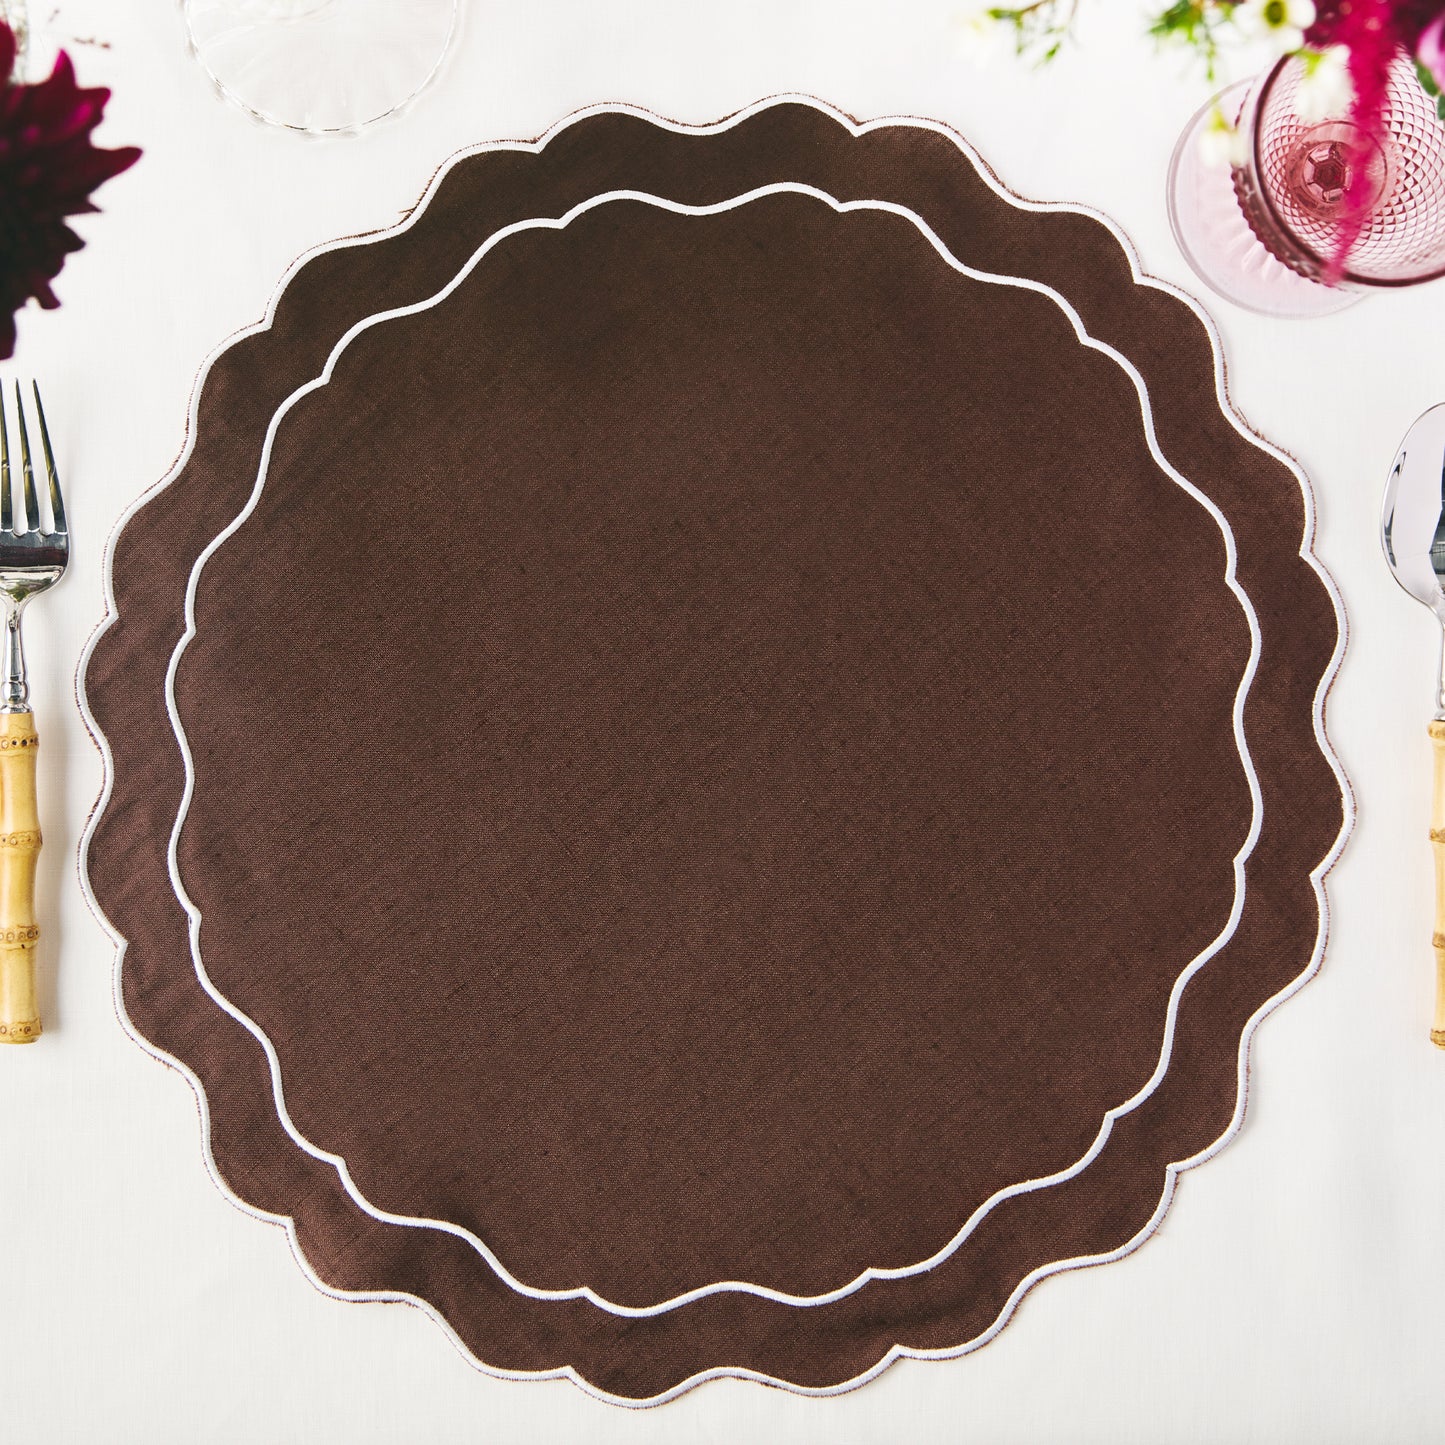 Set of 4 - Pure Linen Scalloped Edged Placemat - Chocolate